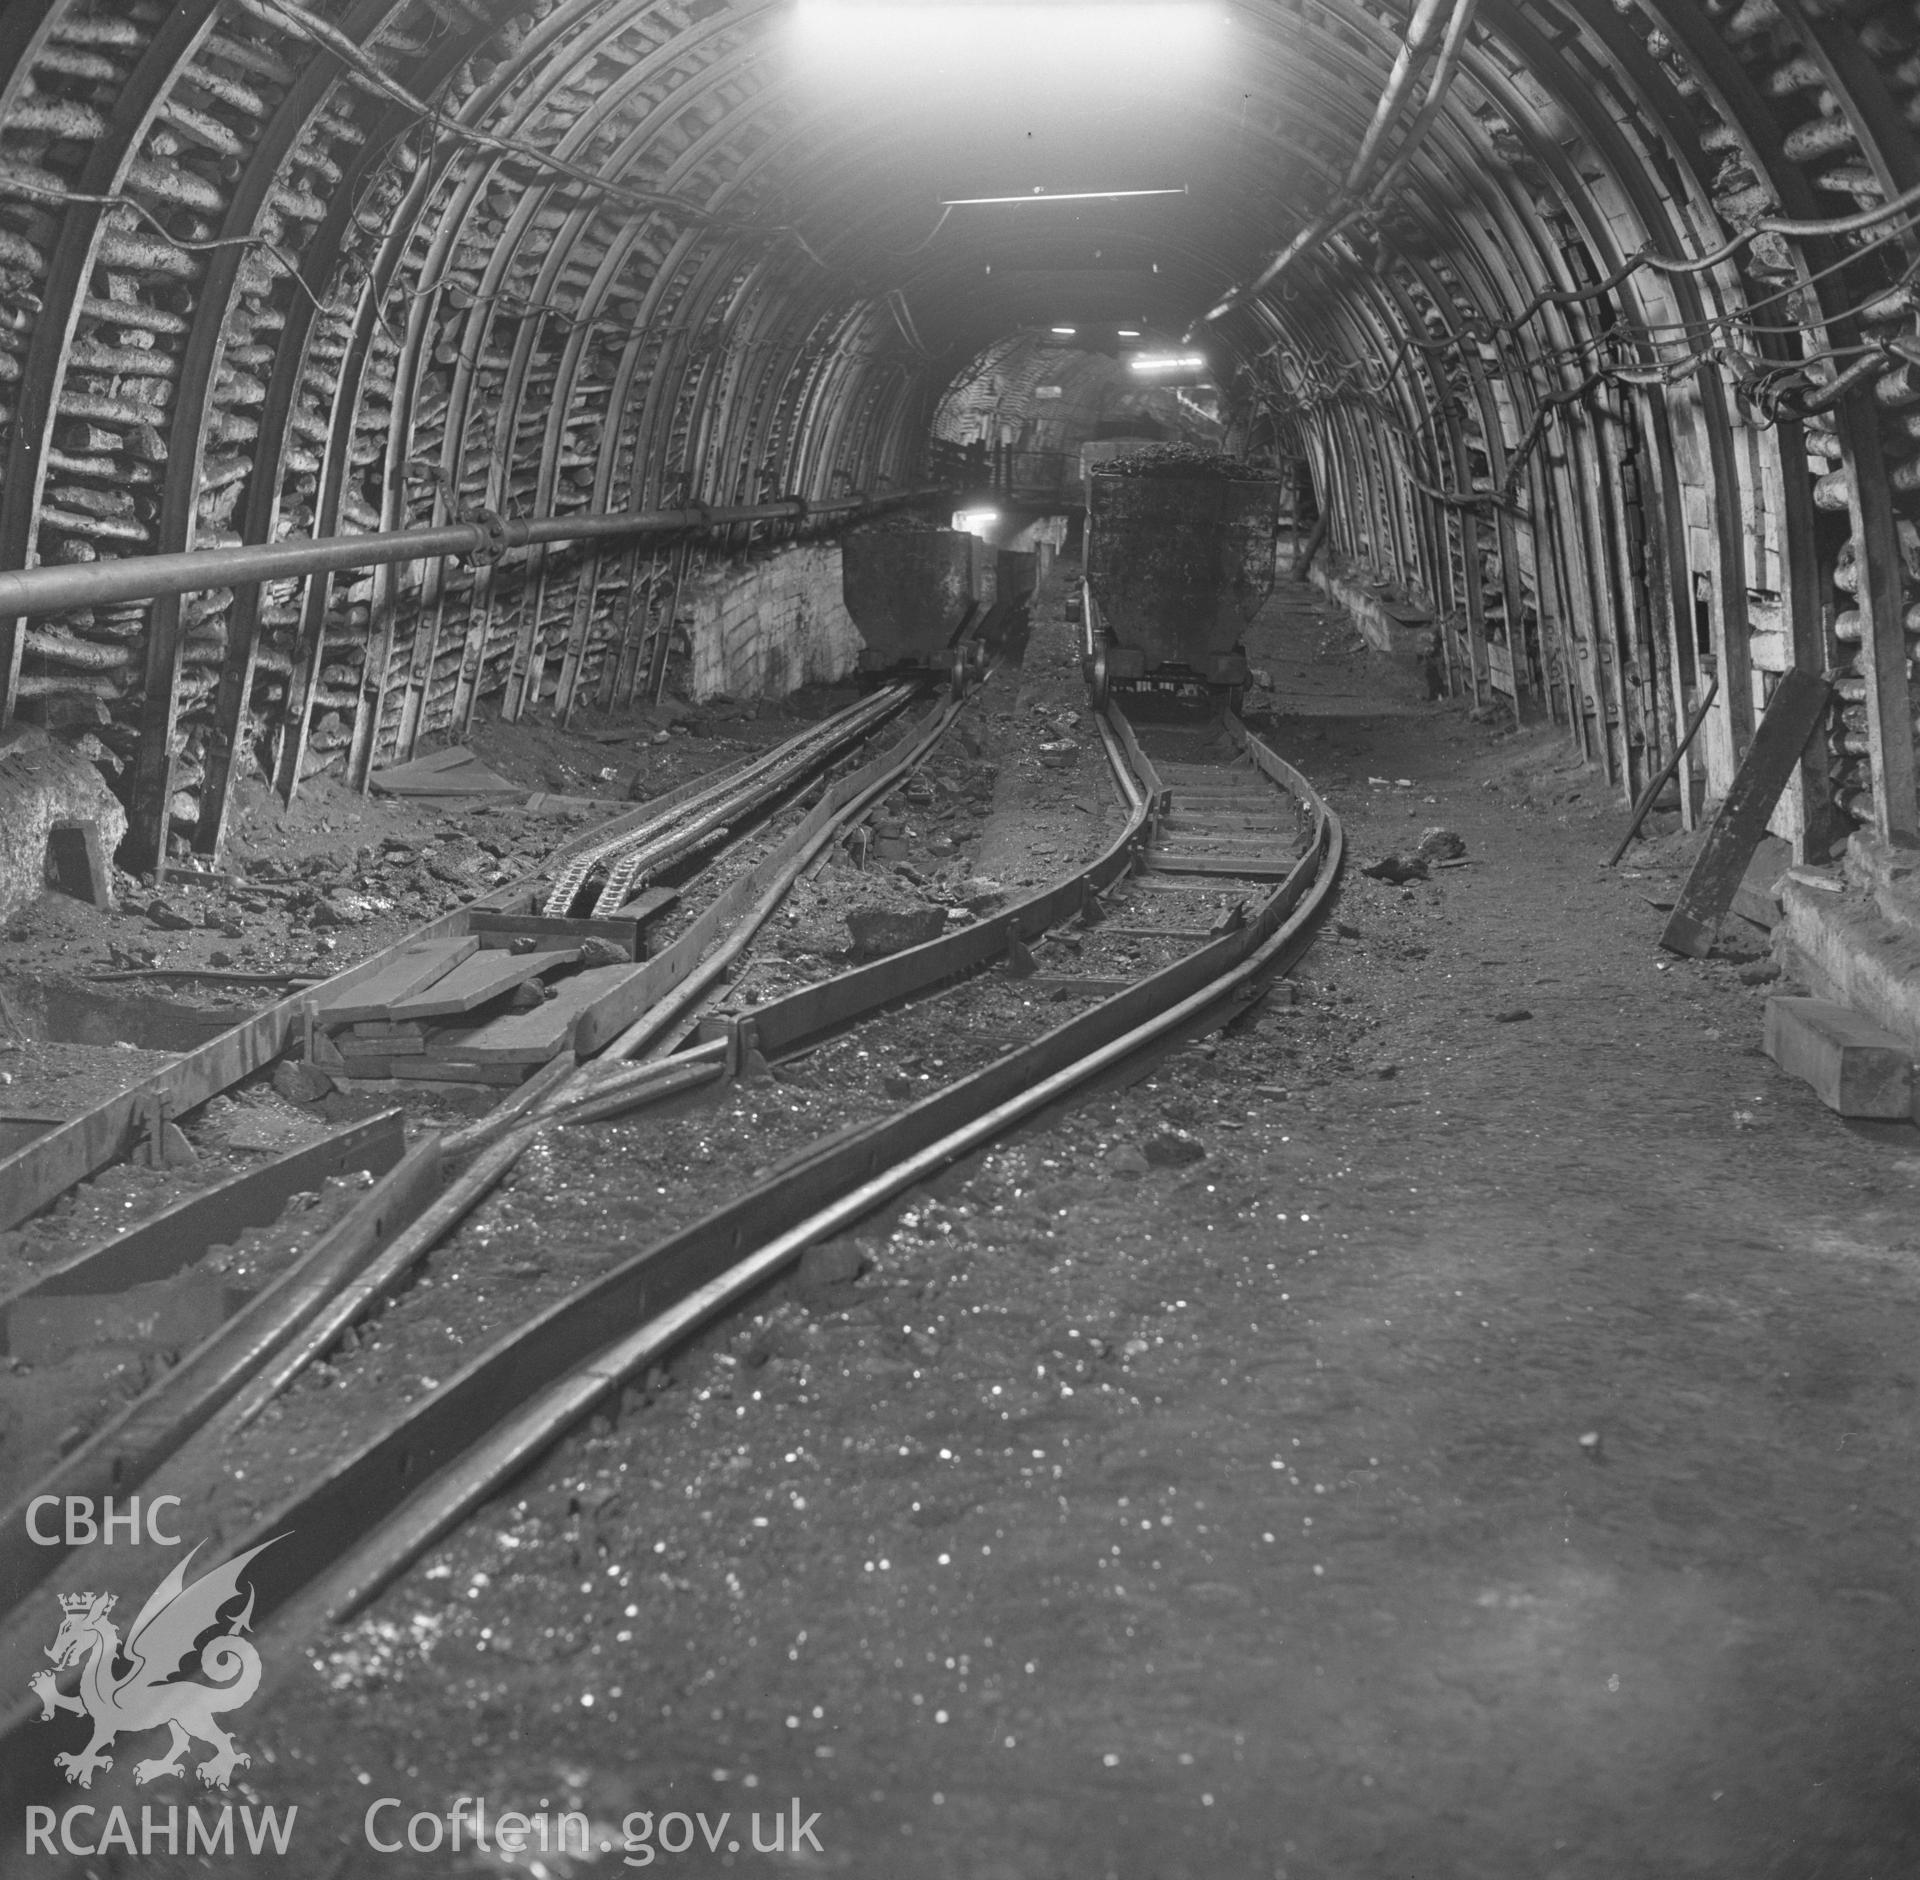 Digital copy of an acetate negative showing bottom of downcast shaft at Ocean Deep Navigation Colliery, from the John Cornwell Collection.